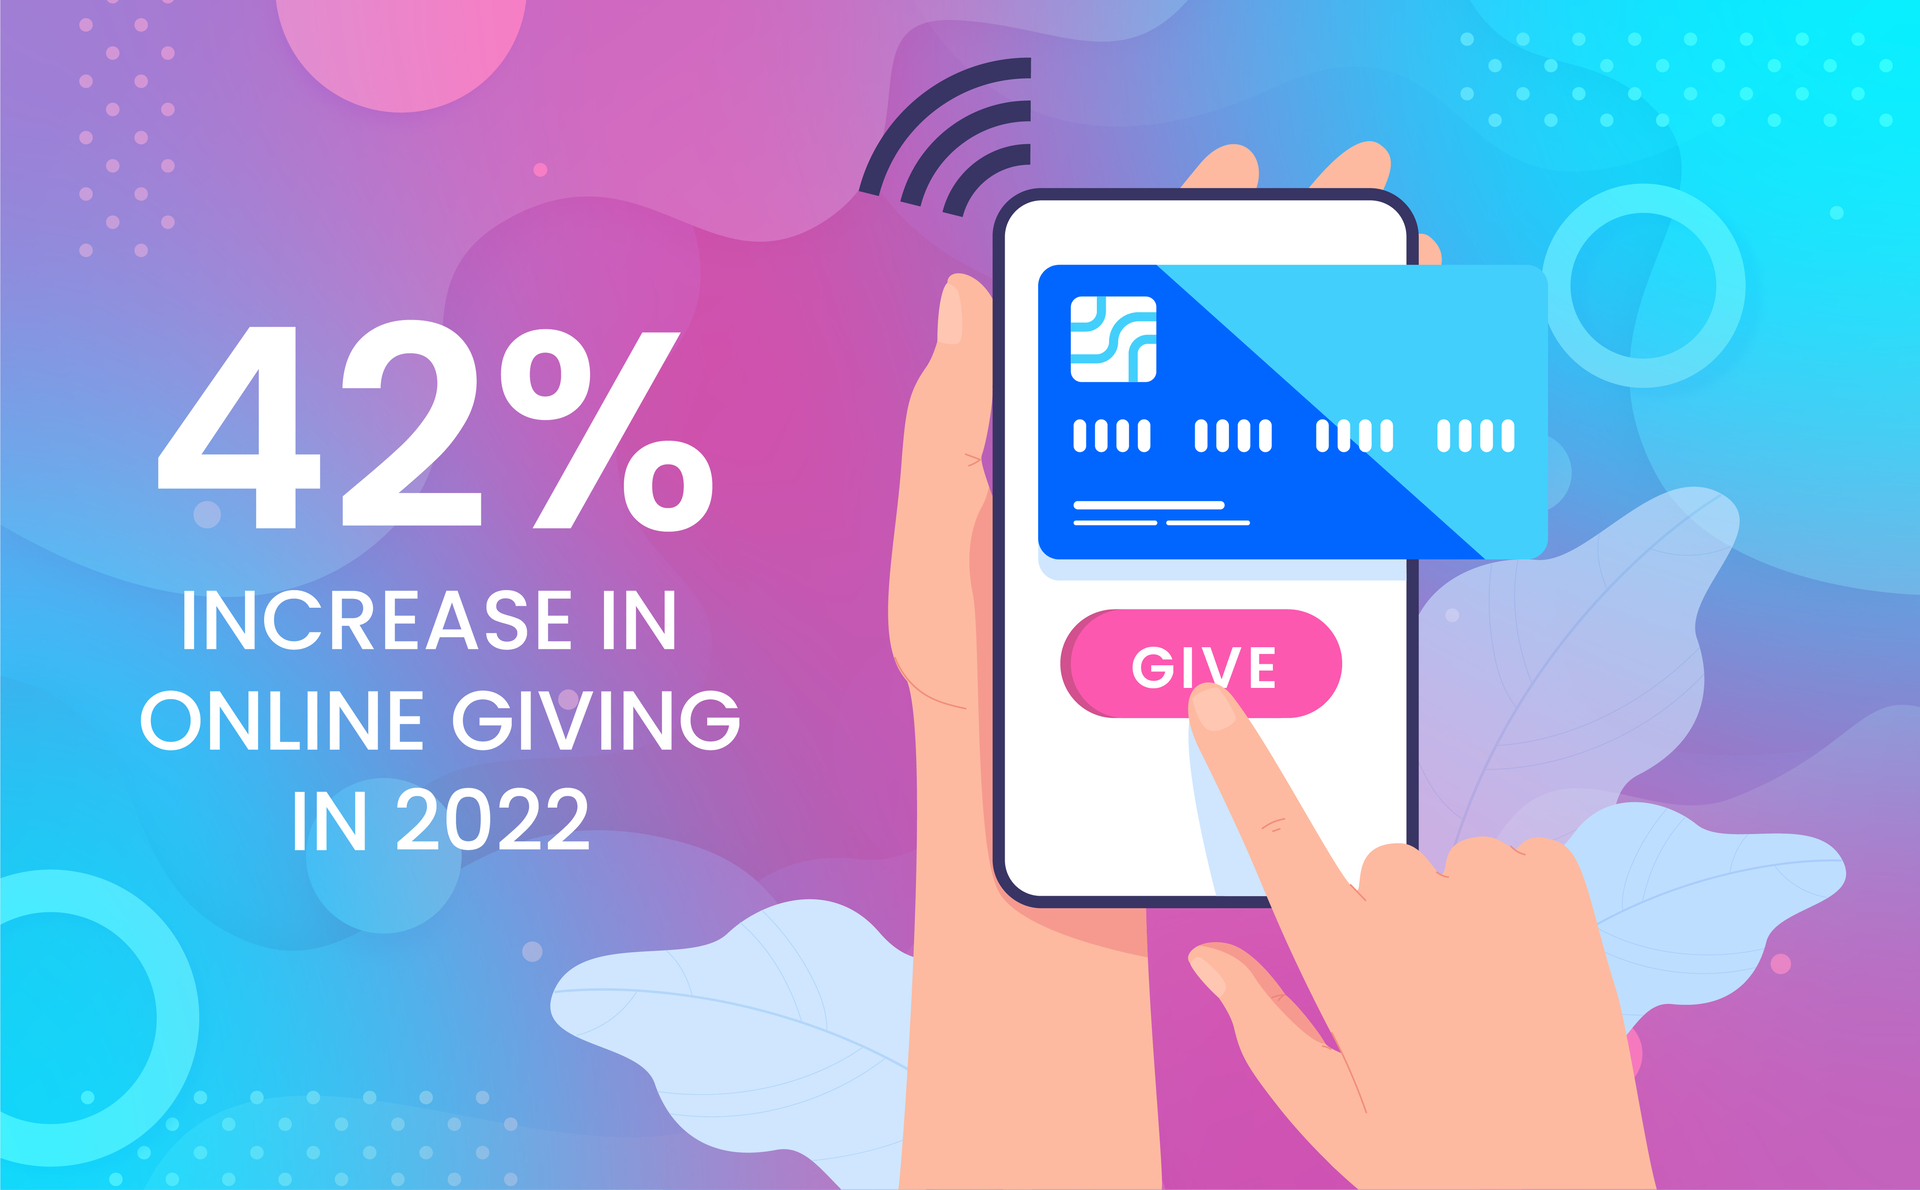 In 2022 we saw a 42% increase in online giving.